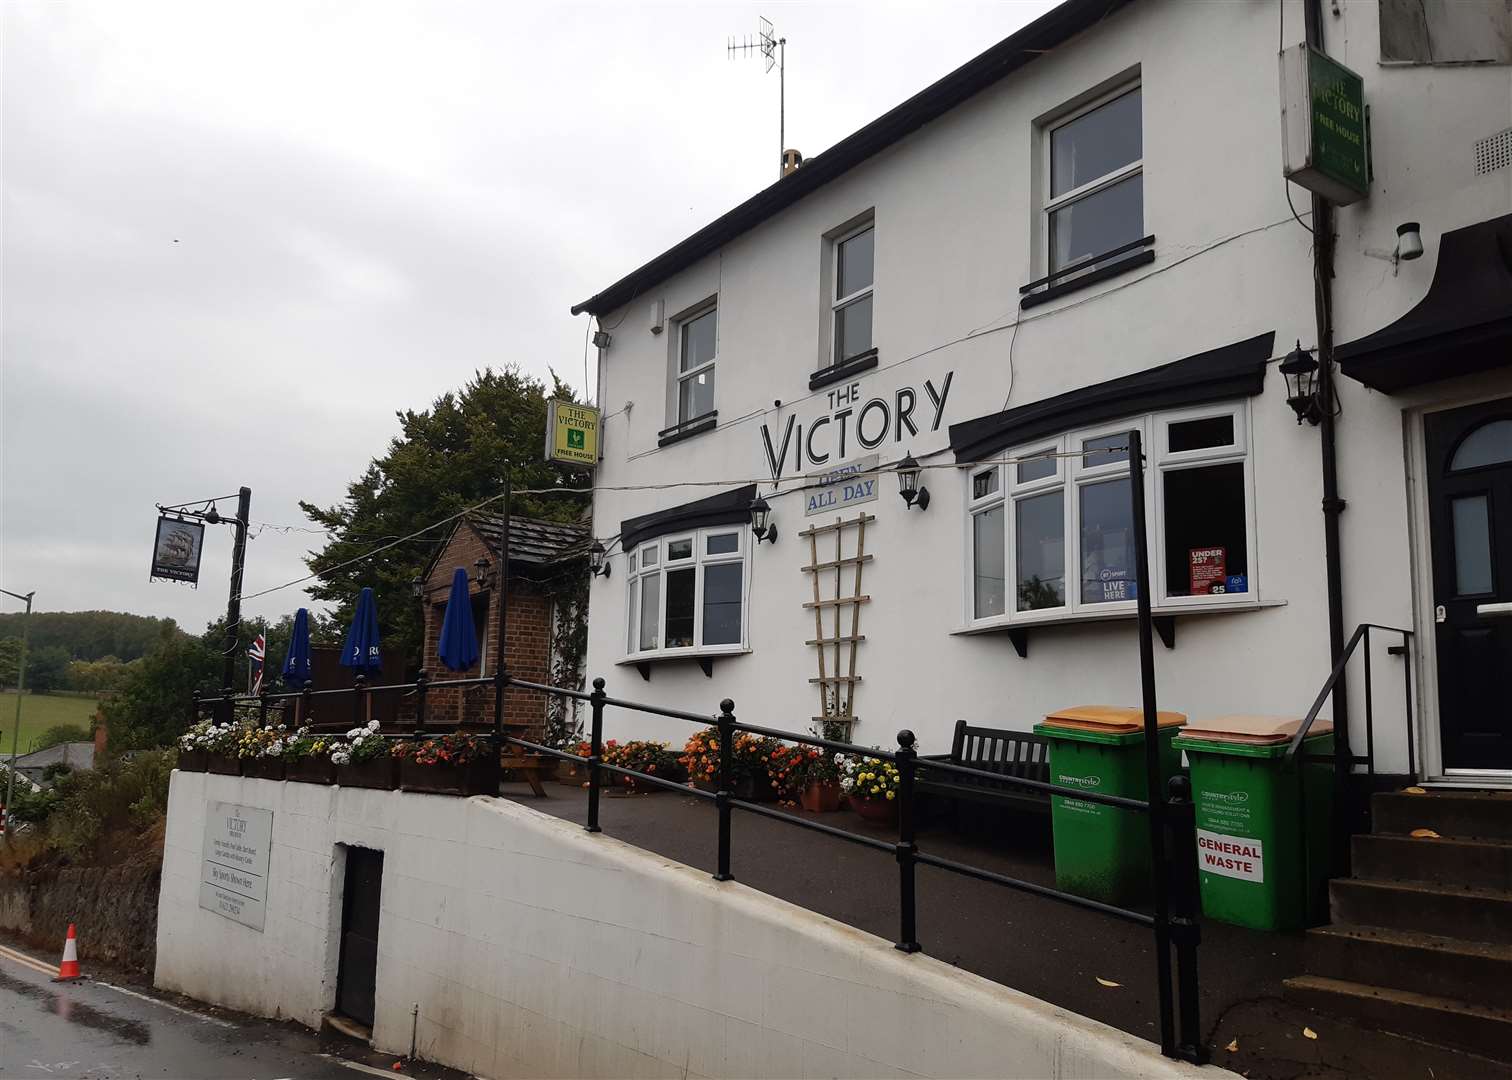 The owner of The Victory Pub says he will lose 75% of trade from the closure